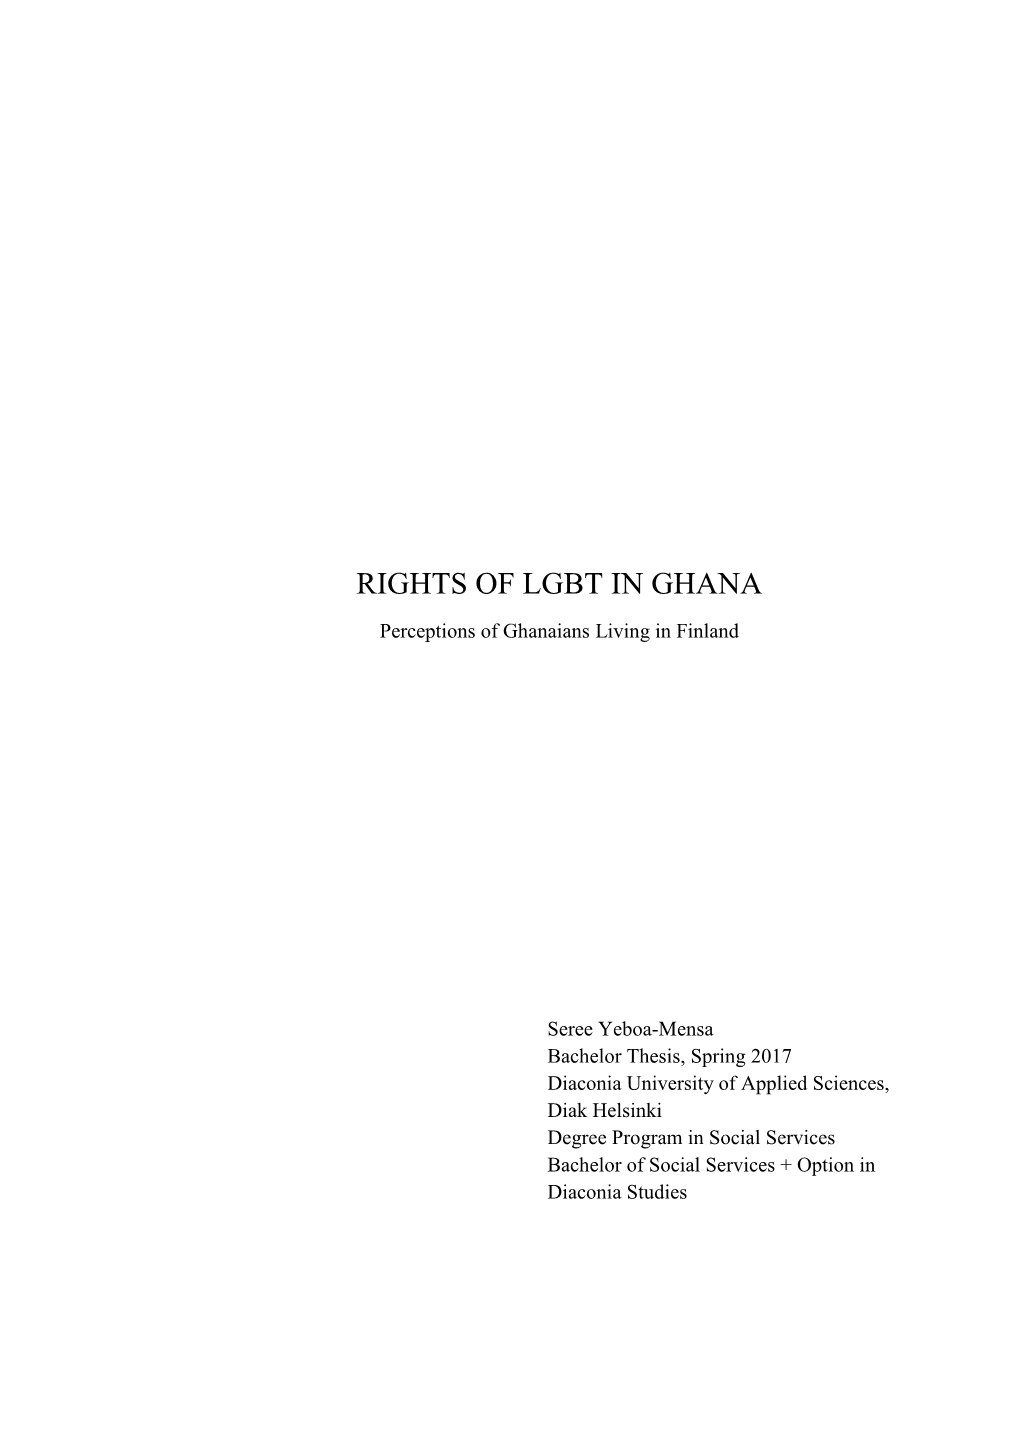 Rights of Lgbt in Ghana